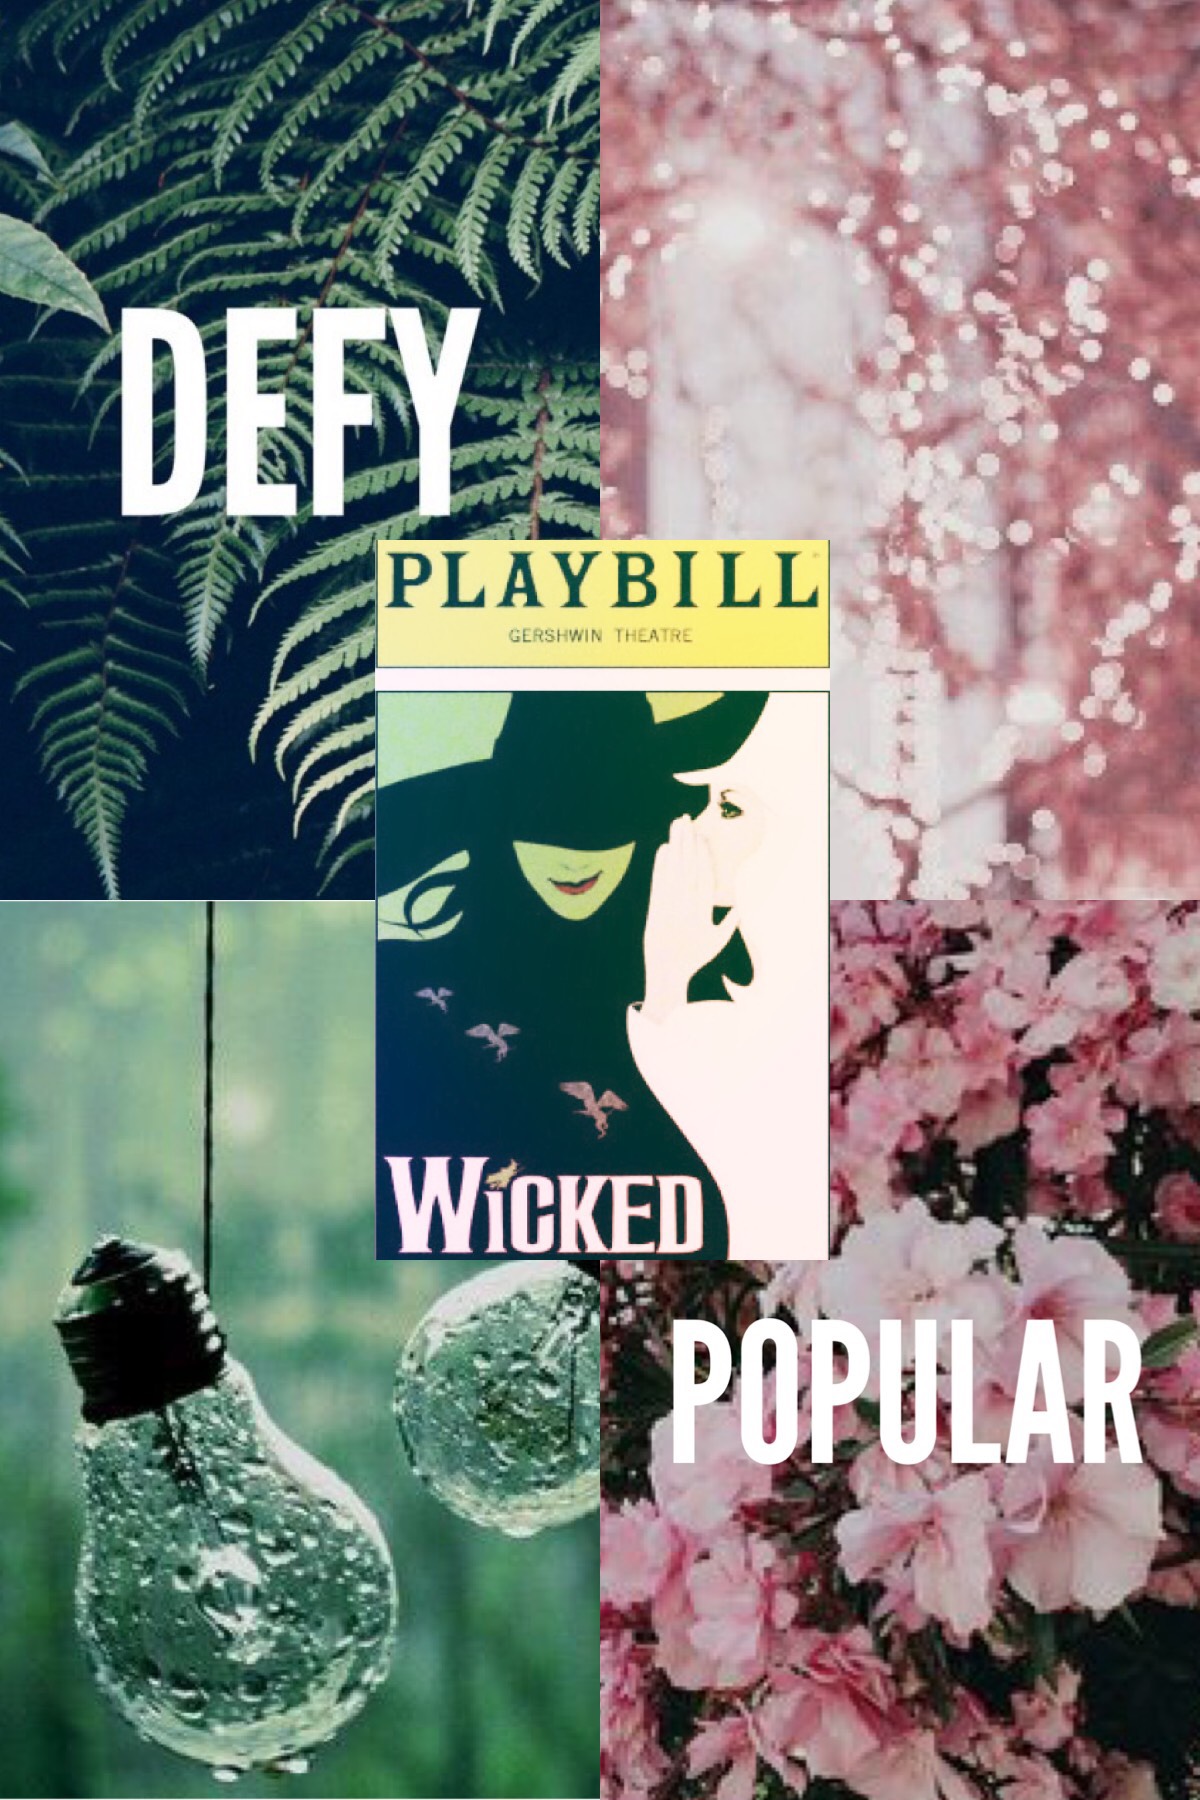 Here’s one more aesthetic that’s Wickedly awesome!
-
Wicked is such an amazing musical and, again, I recommend you watch it!!! 💖💚